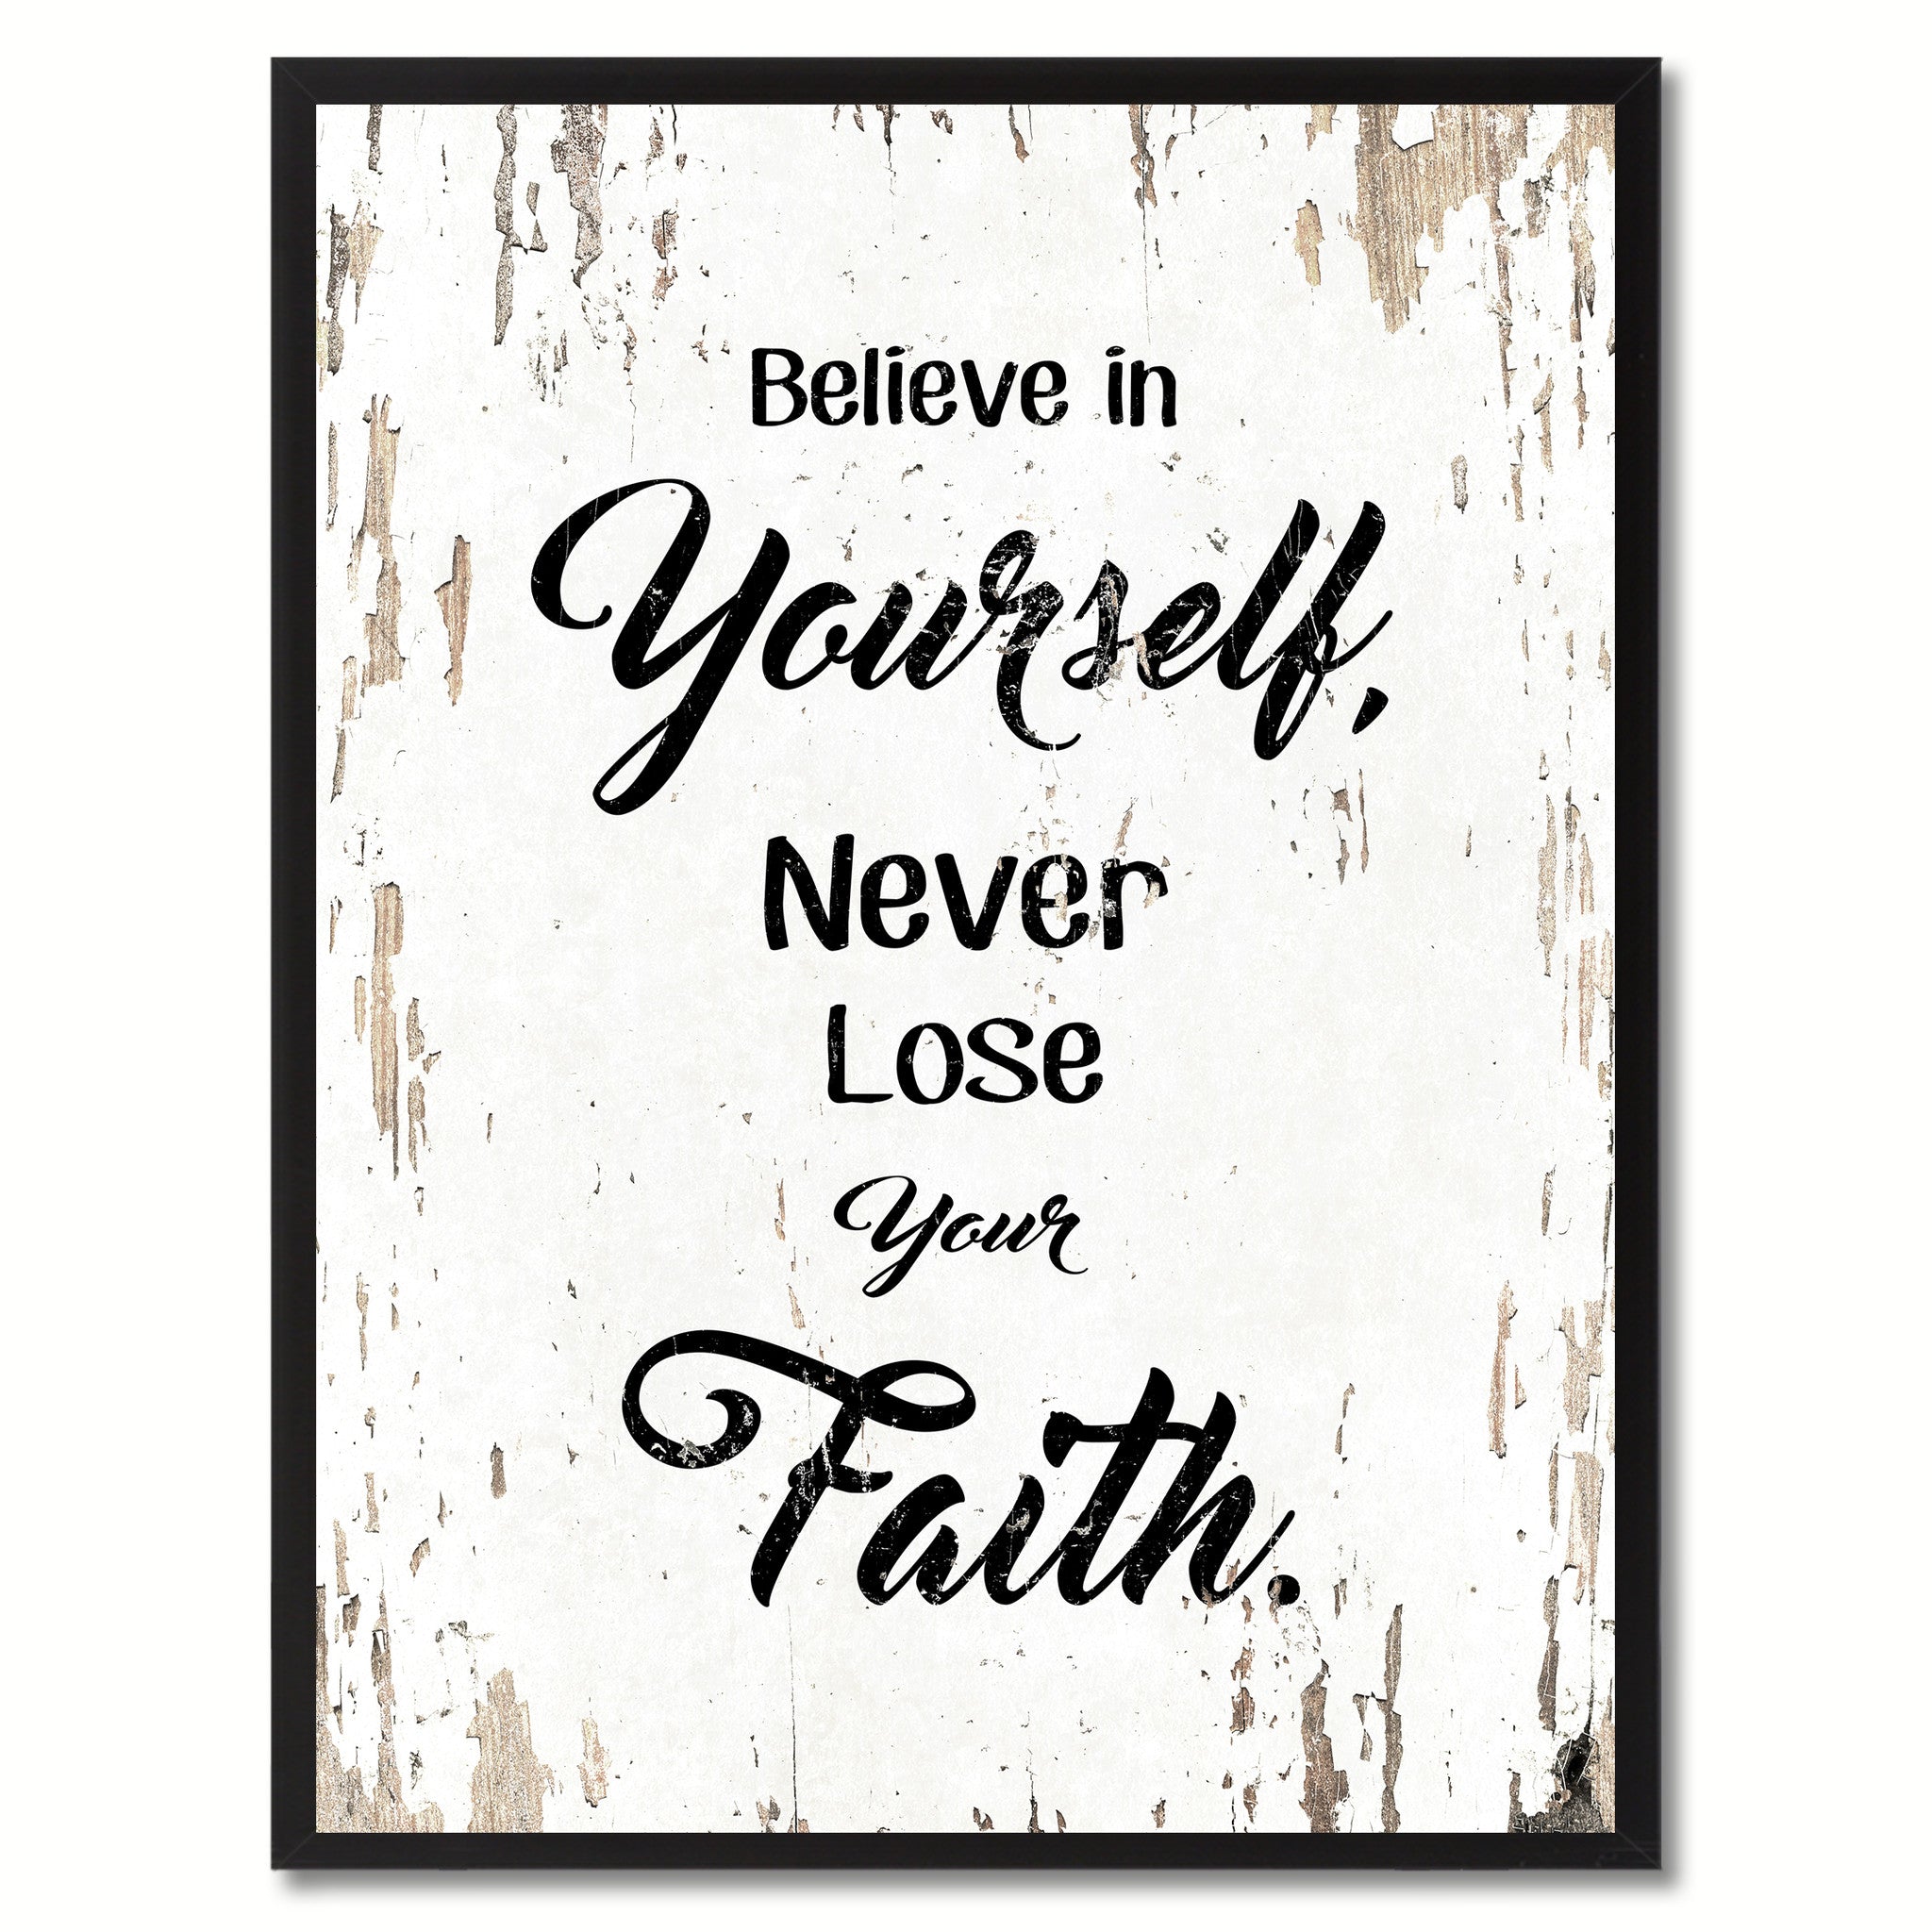 Believe in yourself never lose your faith Inspirational Quote Saying Gift Ideas Home Decor Wall Art